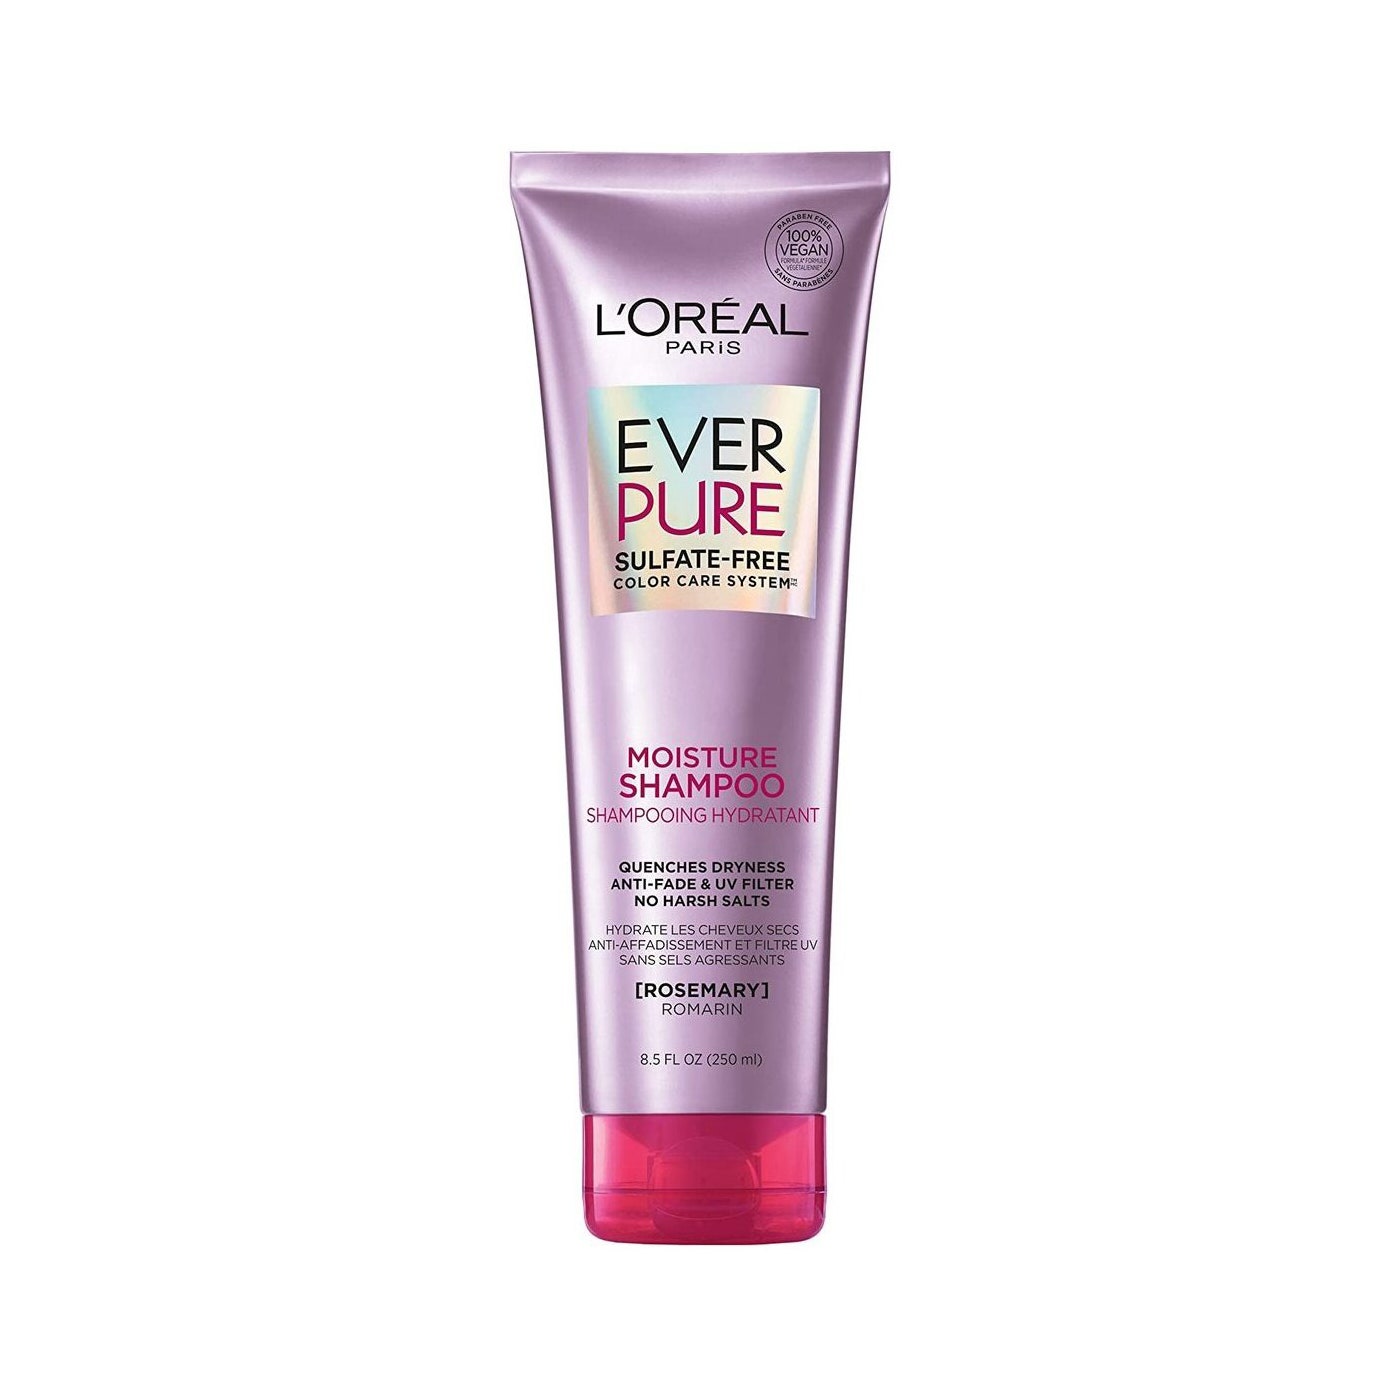 <p><strong>Why It's Worth It:</strong> The moisturizing L'Oréal Paris Everpure Shampoo is great for thick hair because it helps weigh it down ever so slightly (a good thing for those prone to frizz). The color-safe formula gently cleanses your colored hair, giving you all the moisturizing benefits without excessive stripping.</p> <p><strong>Editor Tip:</strong> After your shower, rub a tiny dab of the <a href="https://cna.st/affiliate-link/pJiQD5D8qM68StXSS9QL4n4BaT7HzE8S6HDzofr5pxuHQpqSVgtV2kCfruwK9LBnFBe9axq7dpjLmExgKDPRtp9Qz4aLqCYjaV7kHBw7EeQ4nMSehmBQAFbS5inWieFuLcQuxwLG9HRwudbzkbfjQ1gEmenHhPtpxiYKdnsPRyzNZSAZ5DaWrzguDxXgkrntCPxjbzcBBPoAeHReXzbrhqwdVW25pxigUMWssLtWx4Ee3UMU">L'Oréal Paris Everpure Moisture Conditioner</a> on your ends to prevent any fuzz from forming as you blow-dry.</p> <p><strong>Key Ingredients:</strong> Rosemary oil | <strong>Who It's For:</strong> Anyone in need of budget-friendly frizz reduction.</p> $14, Amazon (Shampoo + Conditioner). <a href="https://www.amazon.com/LOreal-Paris-Conditioner-Color-Treated-Moisturizes/dp/B07QC43BXB">Get it now!</a><p>Get your daily dose of beauty tips, tricks, and product recommendations sent straight to your inbox.</p><a href="https://www.allure.com/newsletter/subscribe?sourceCode=msnsend">Sign Up Now</a>